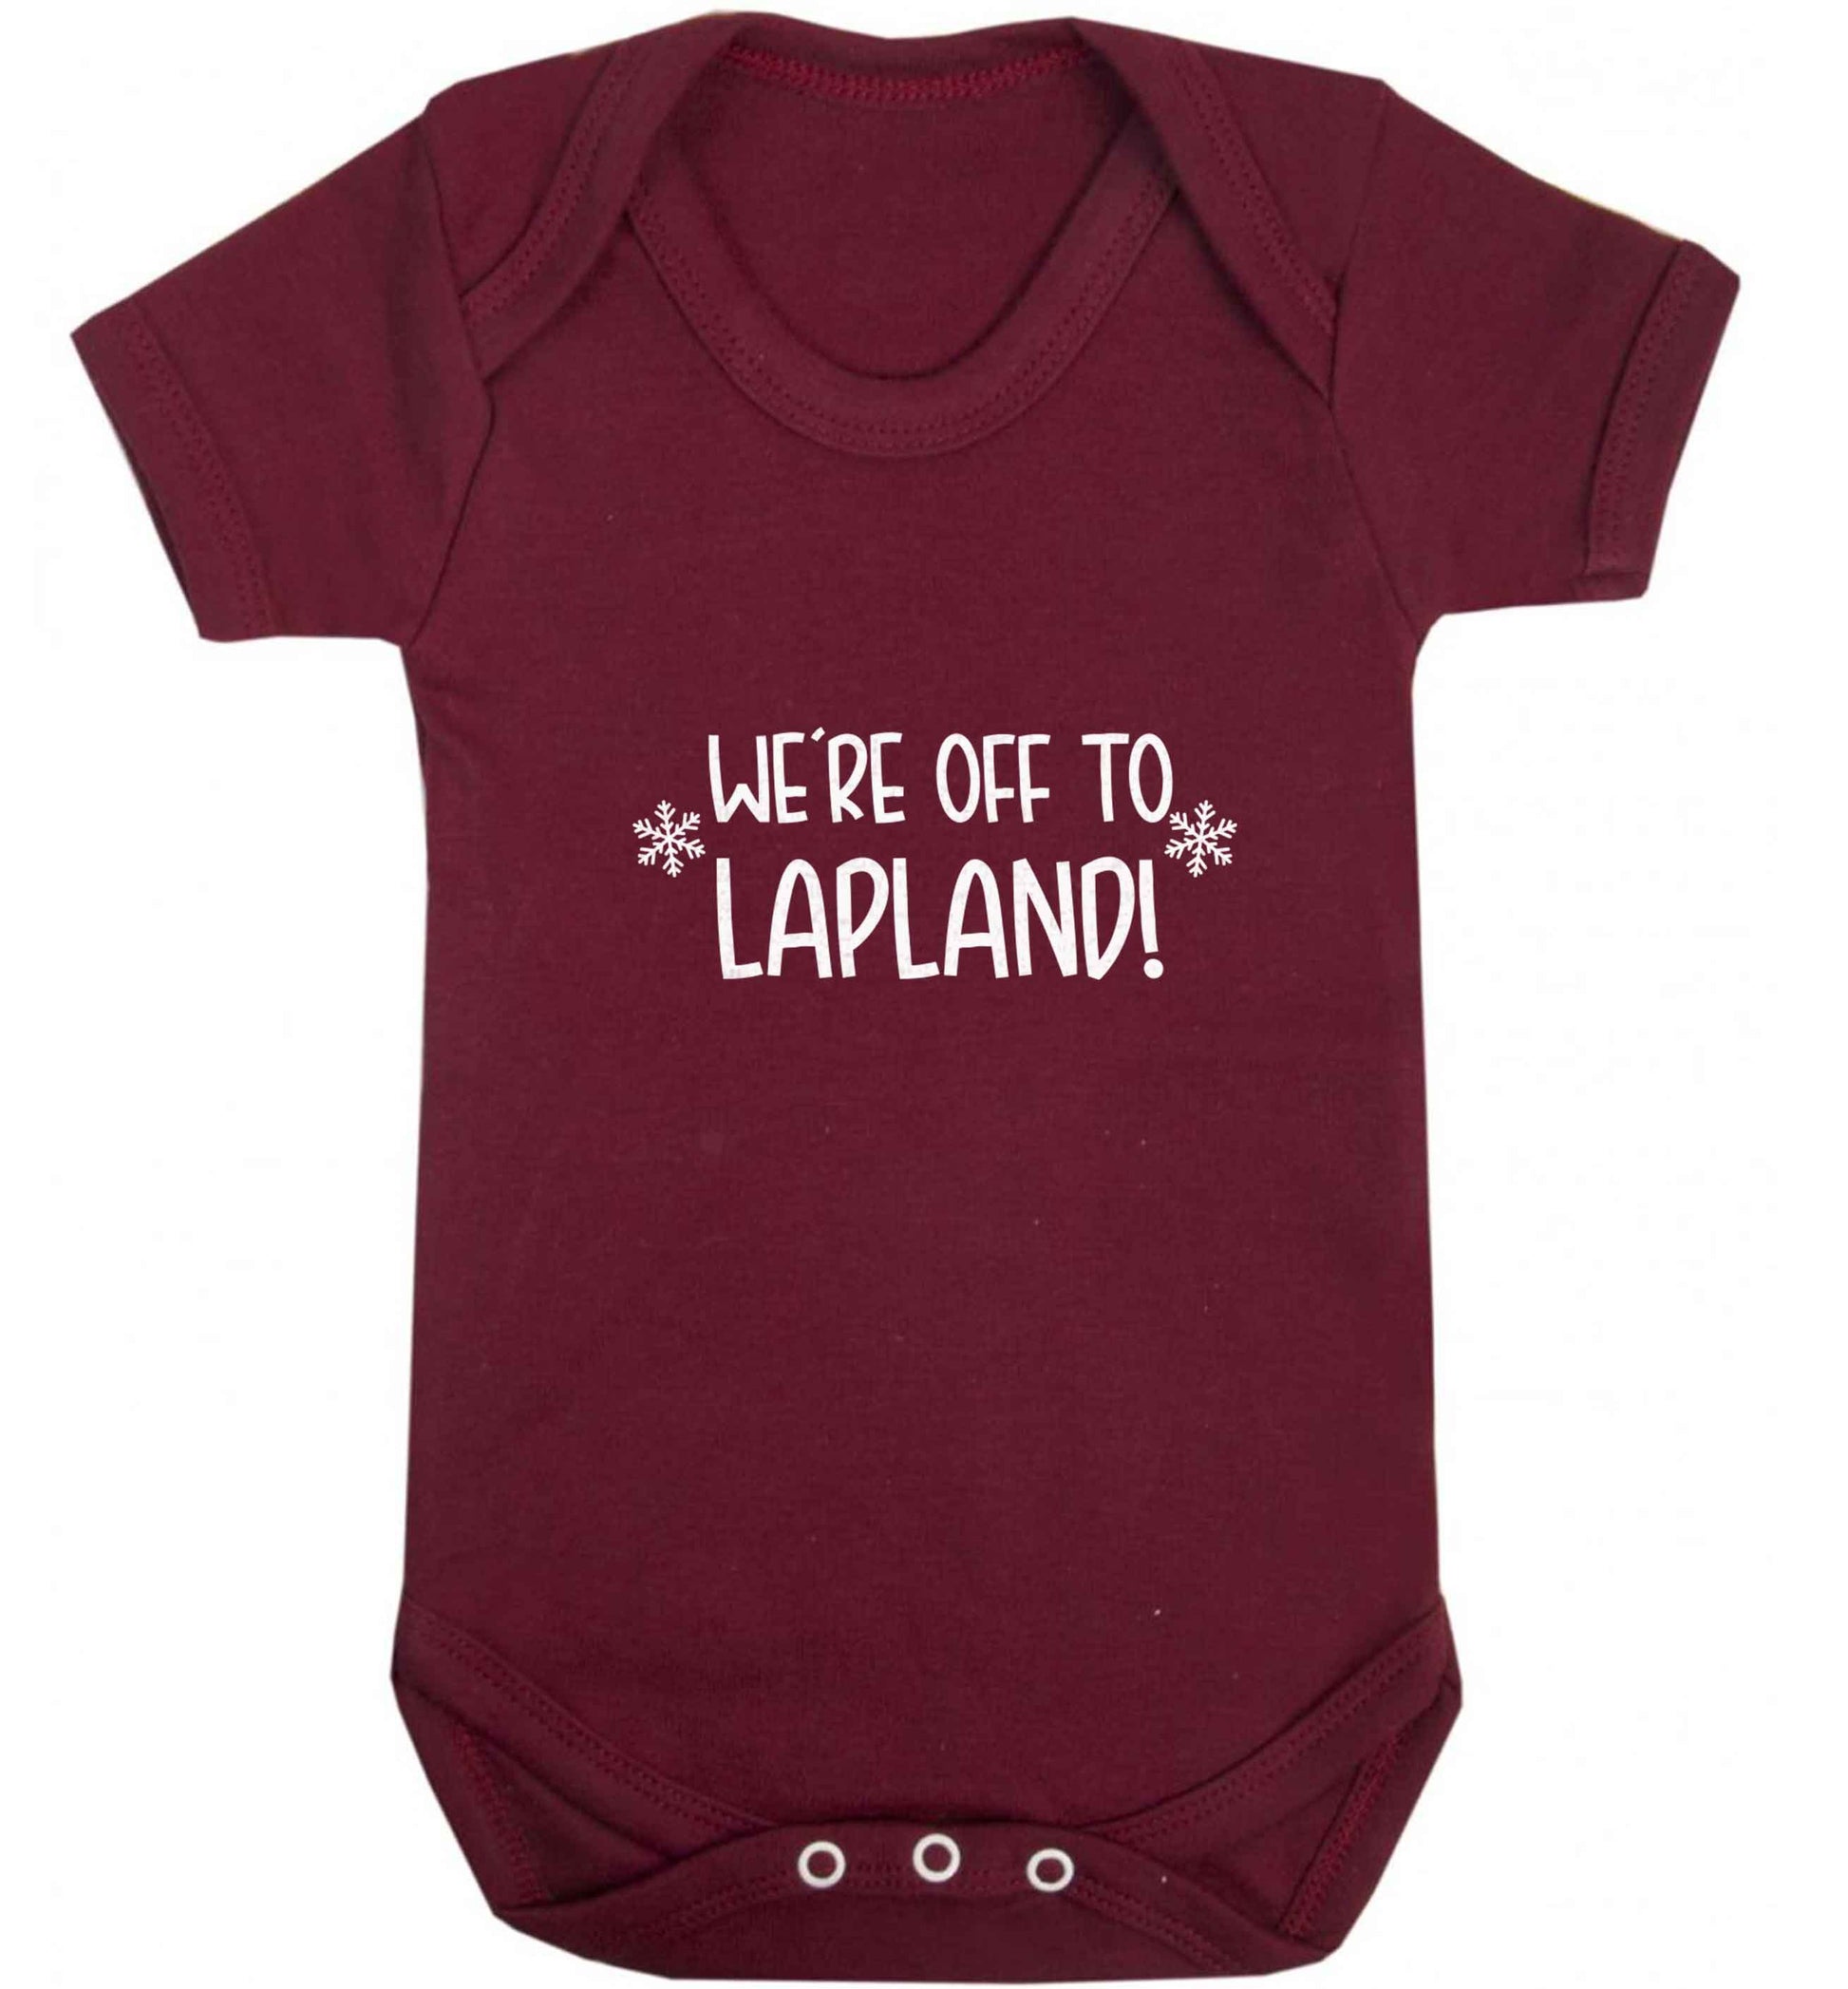 We're off to Lapland baby vest maroon 18-24 months